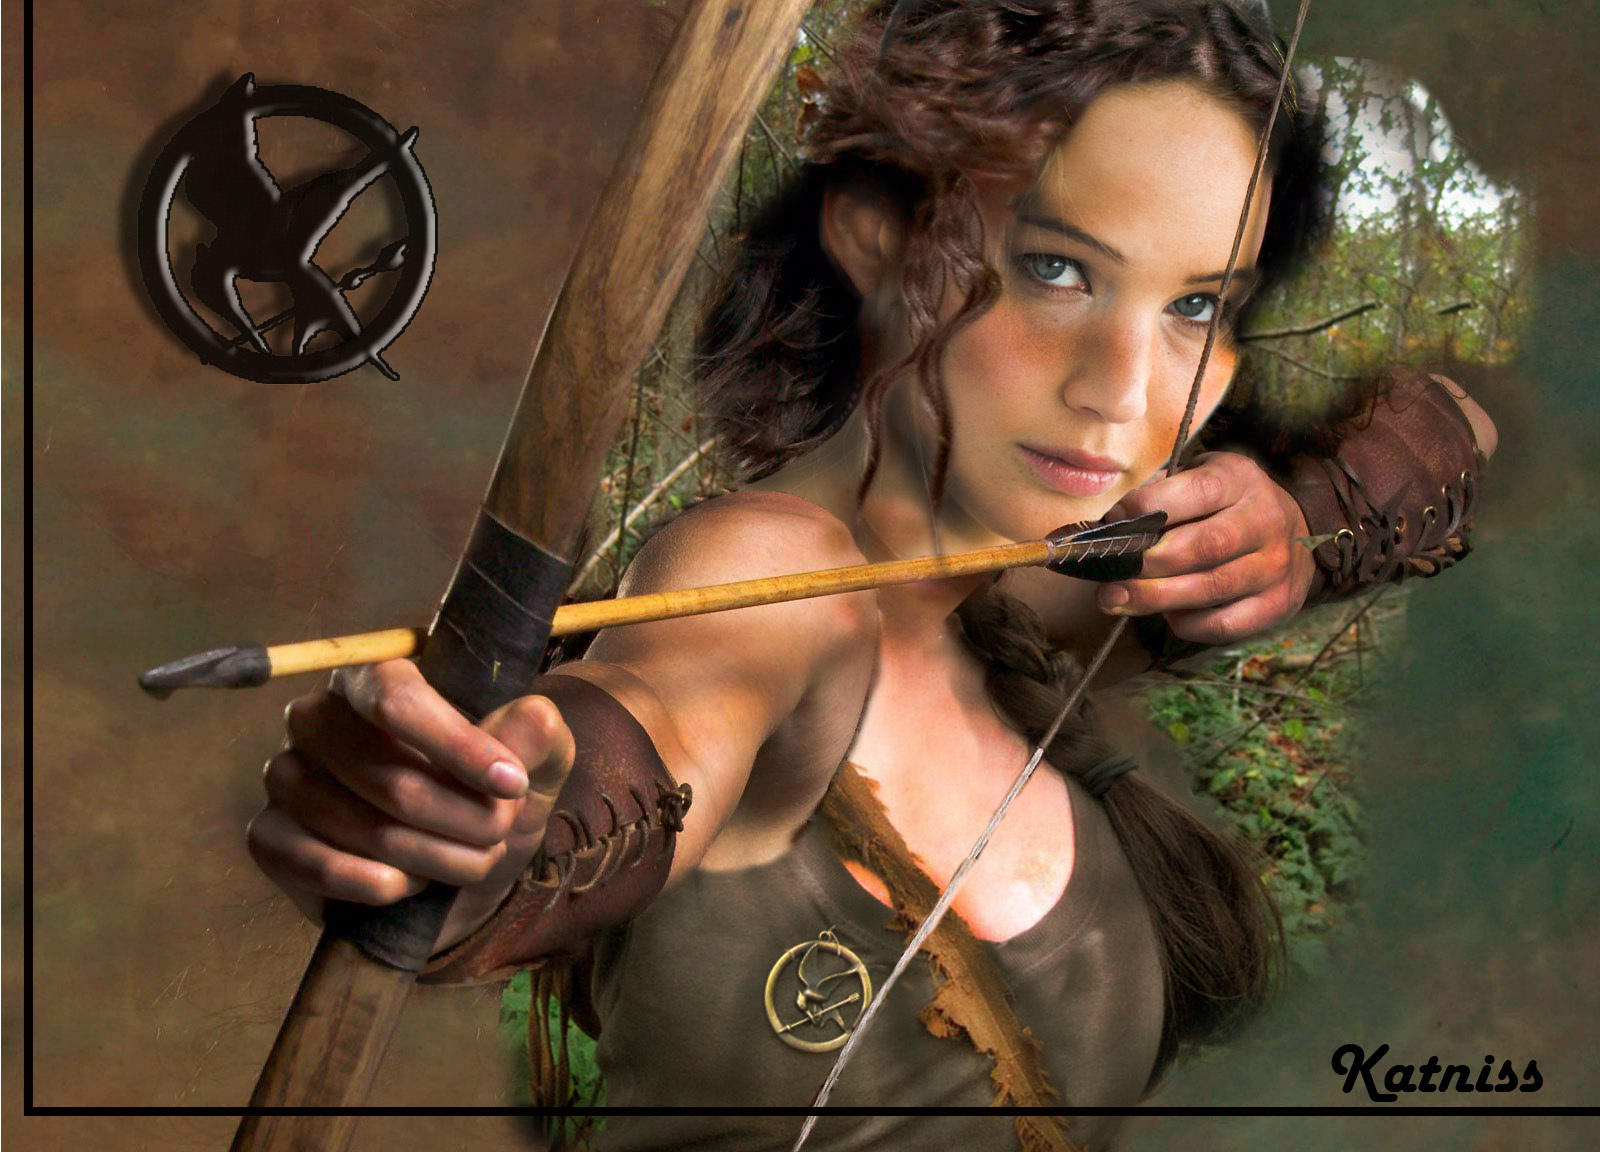 Movie The Hunger Games HD Wallpaper | Background Image